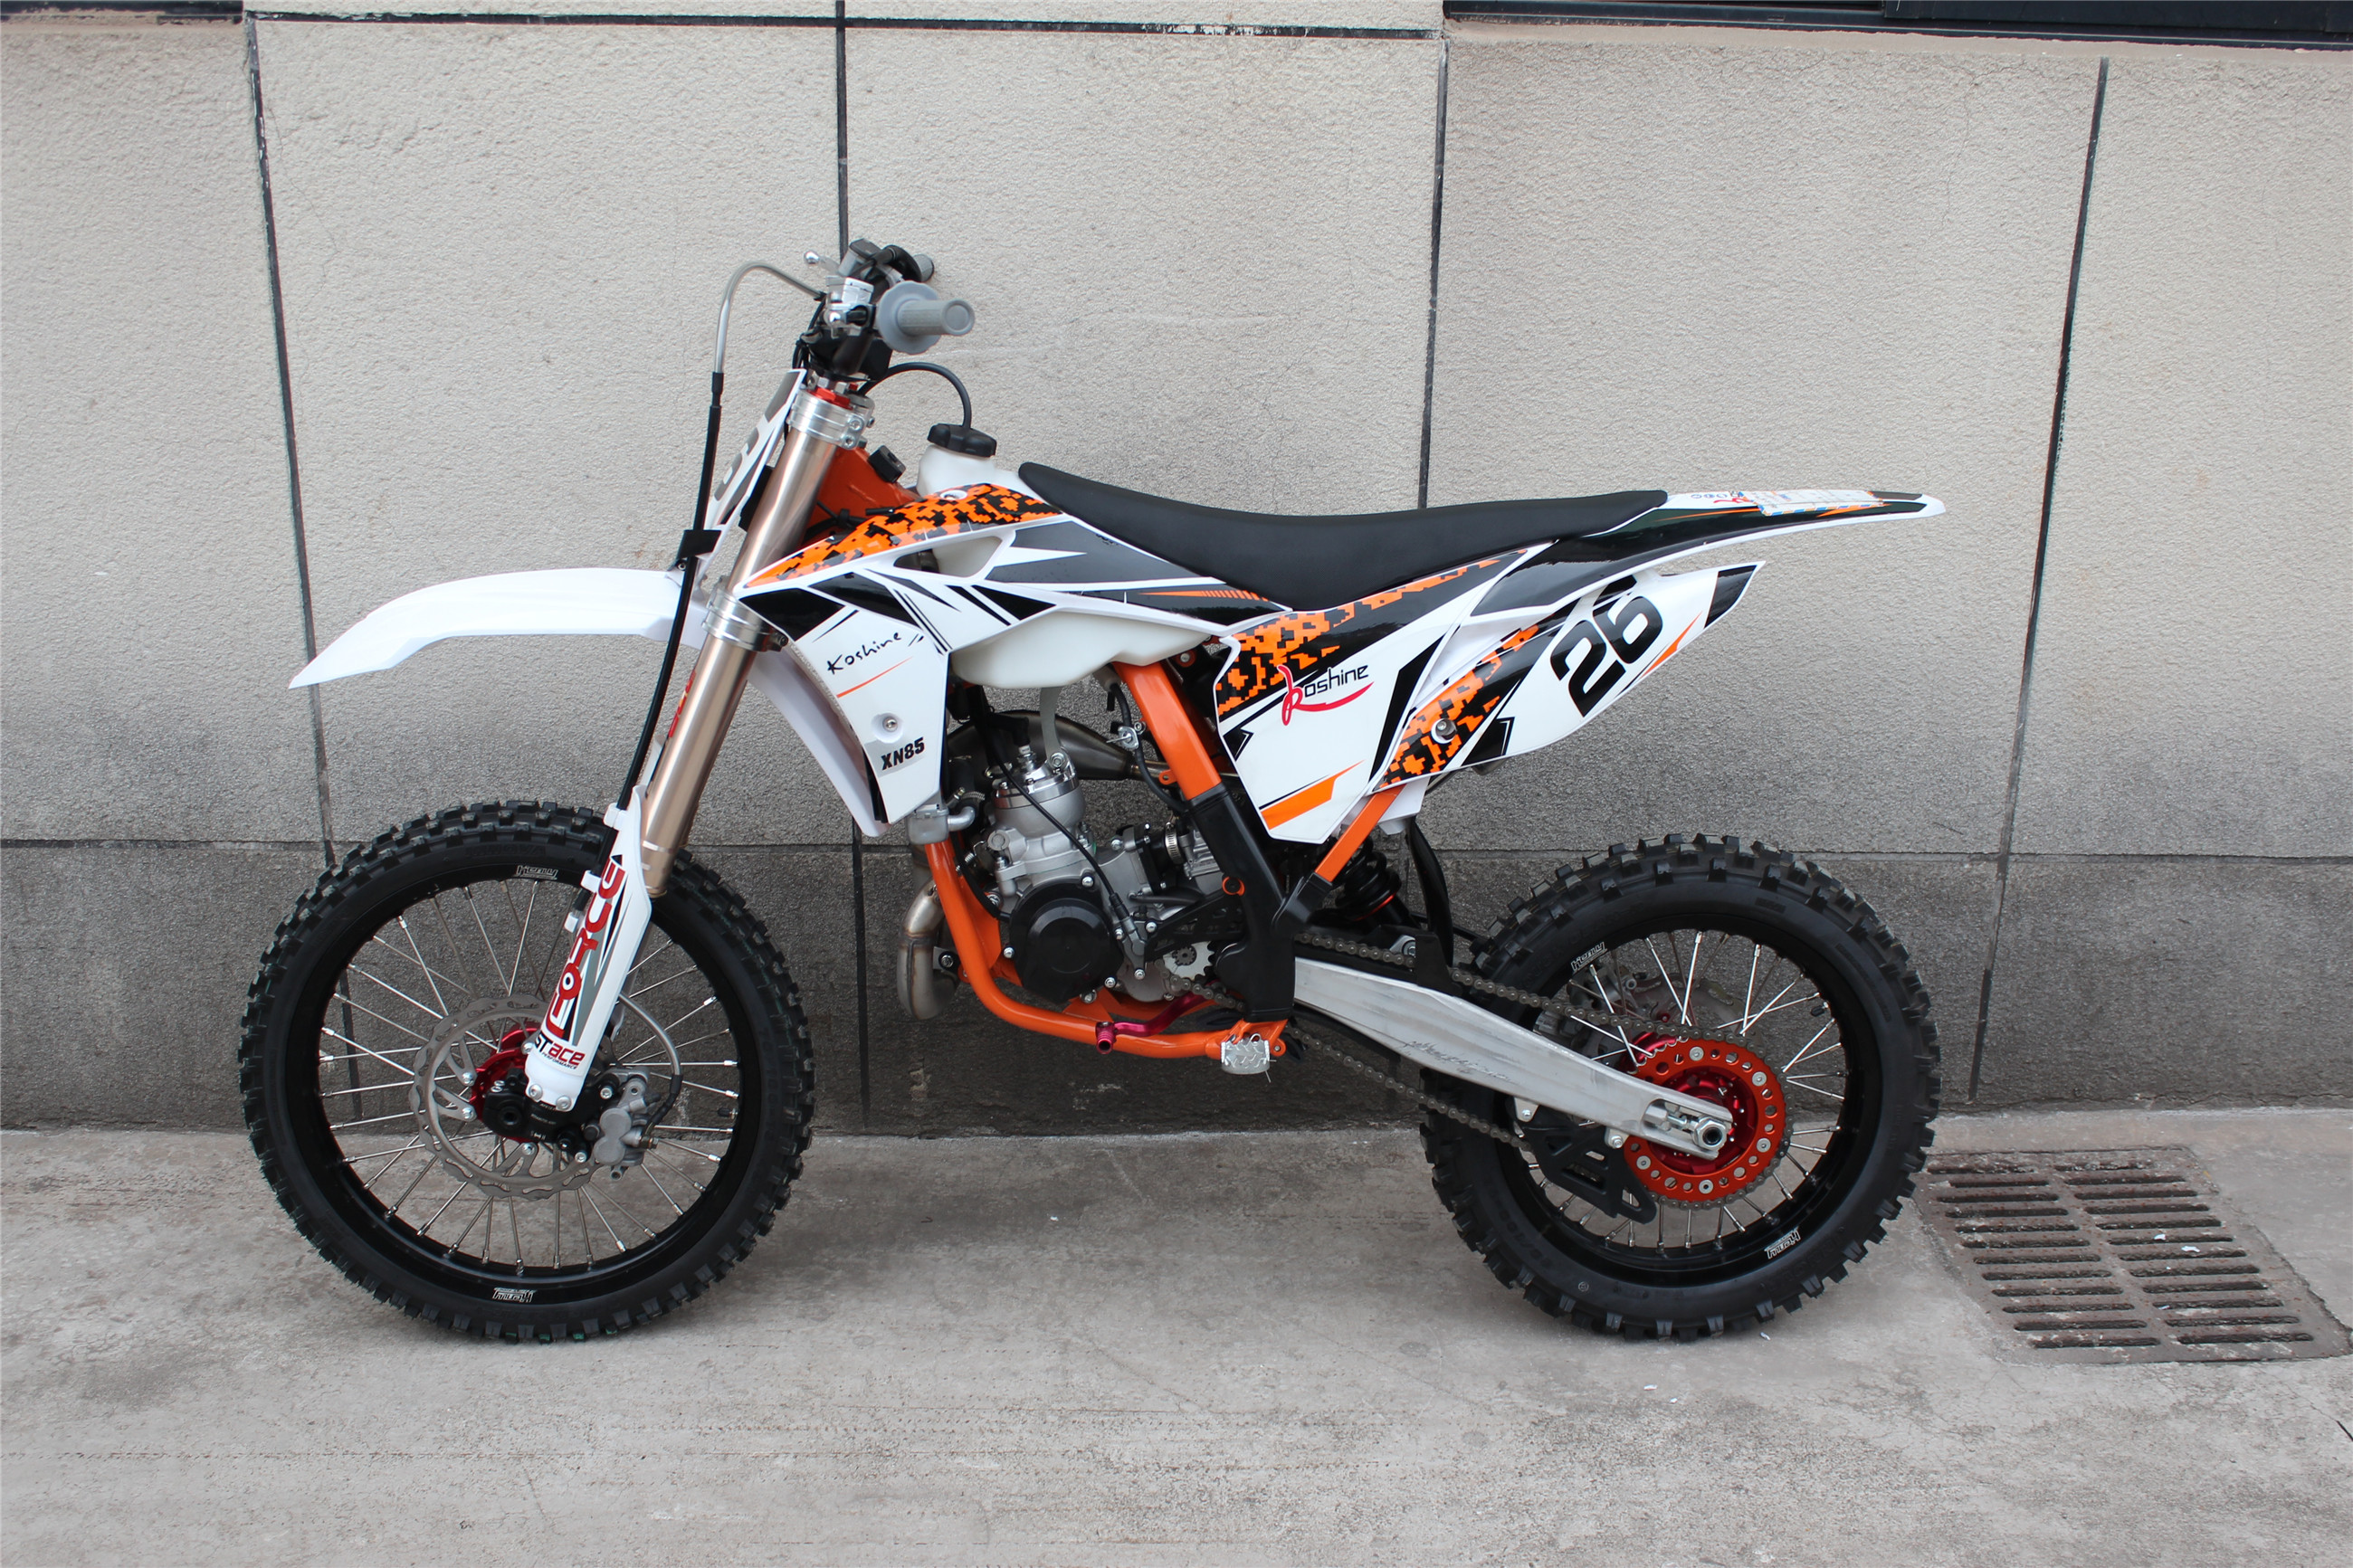 85CC dirt bike with Fastace forks_XN85_Wuyi Koshine Motion Apparatus Co